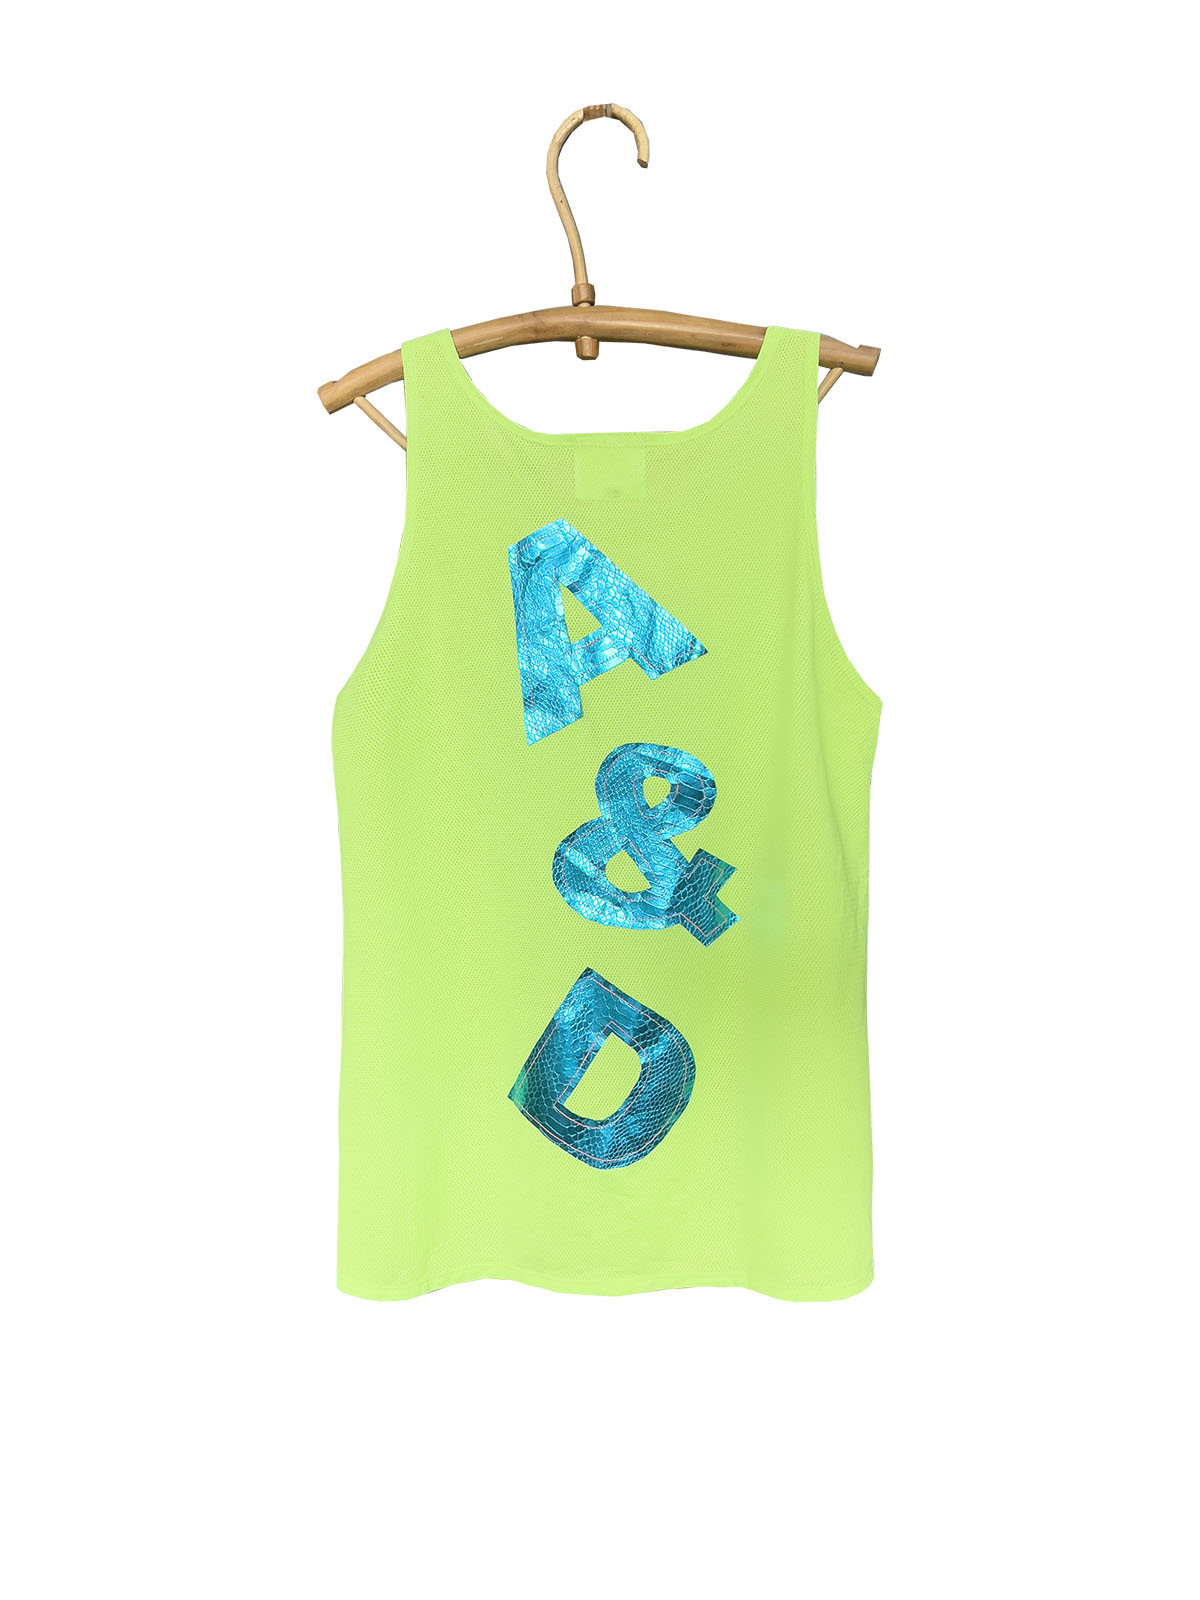 Neon top with logo application - (h)A.N.D. - Handmade in Cambodia - Mitzie Mee Shop